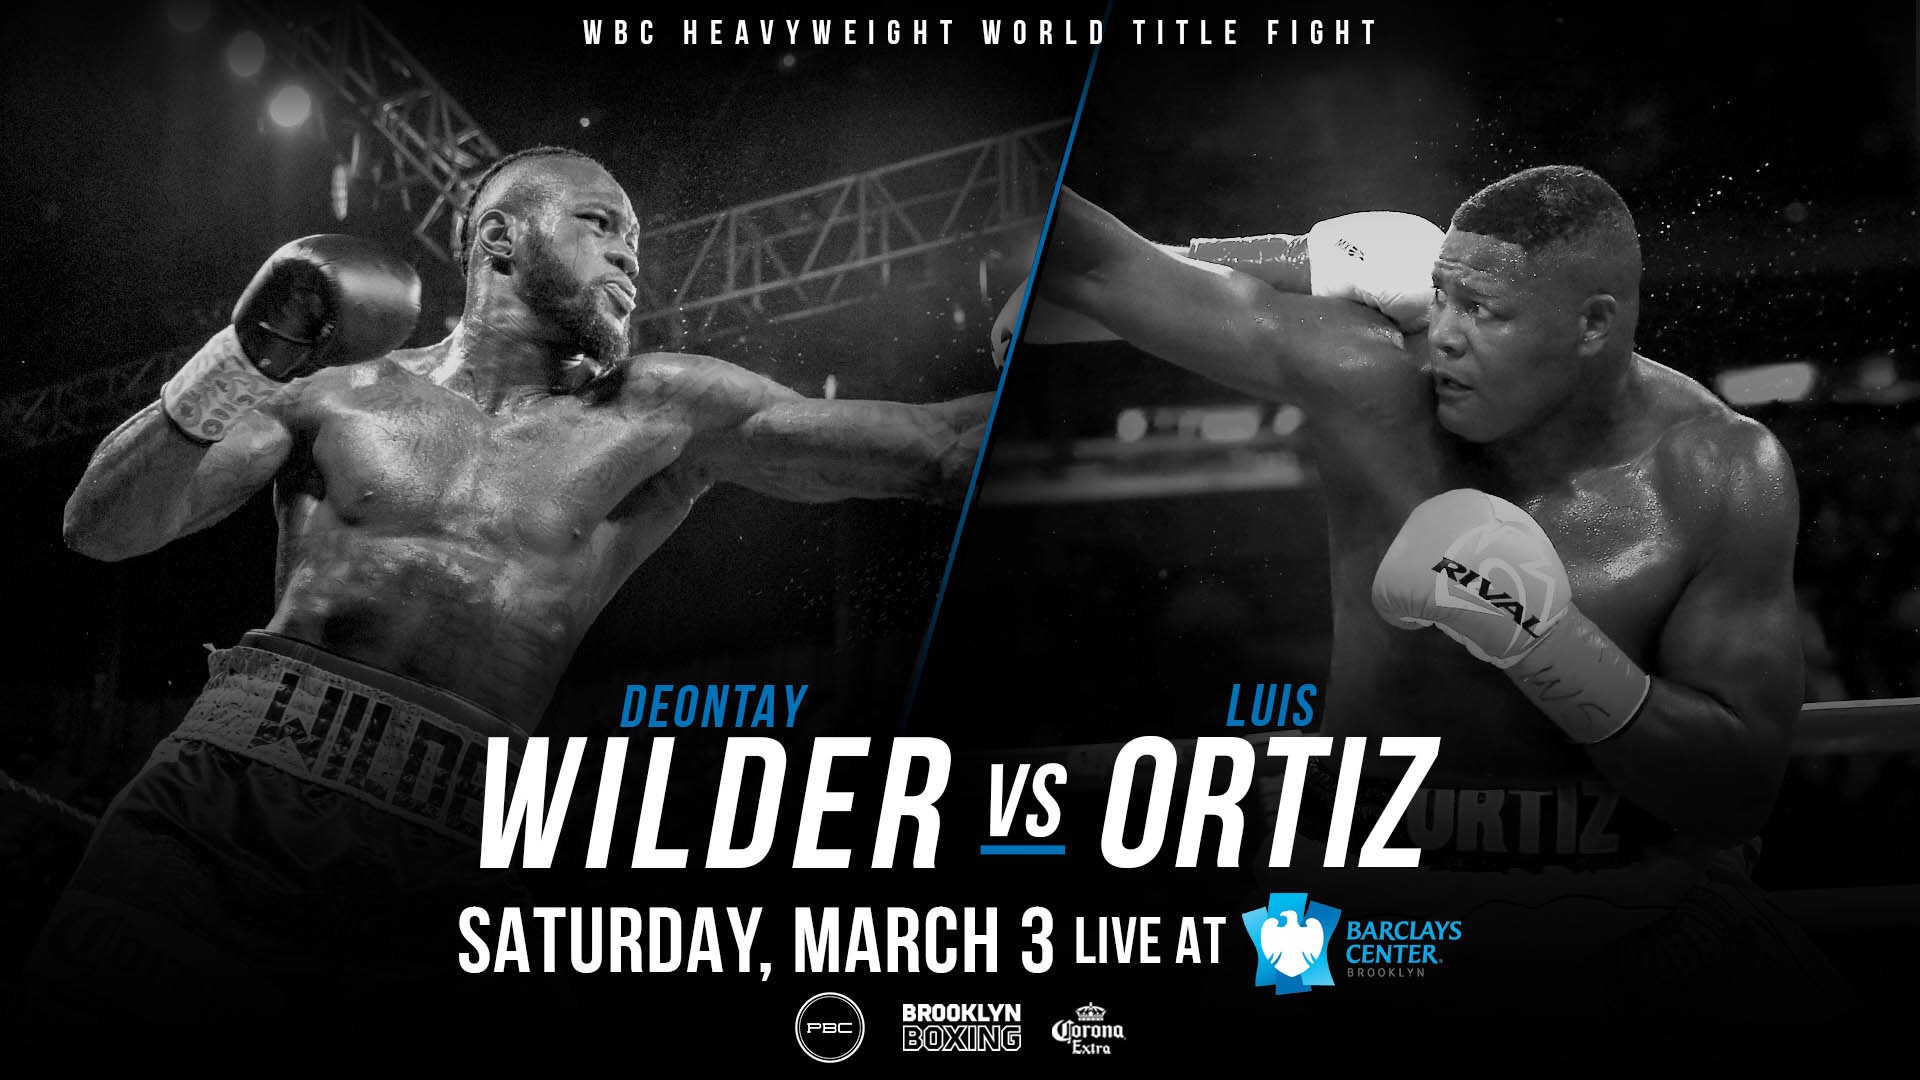 PBC This Just In: Wilder vs Ortiz announced for March 3, 2018